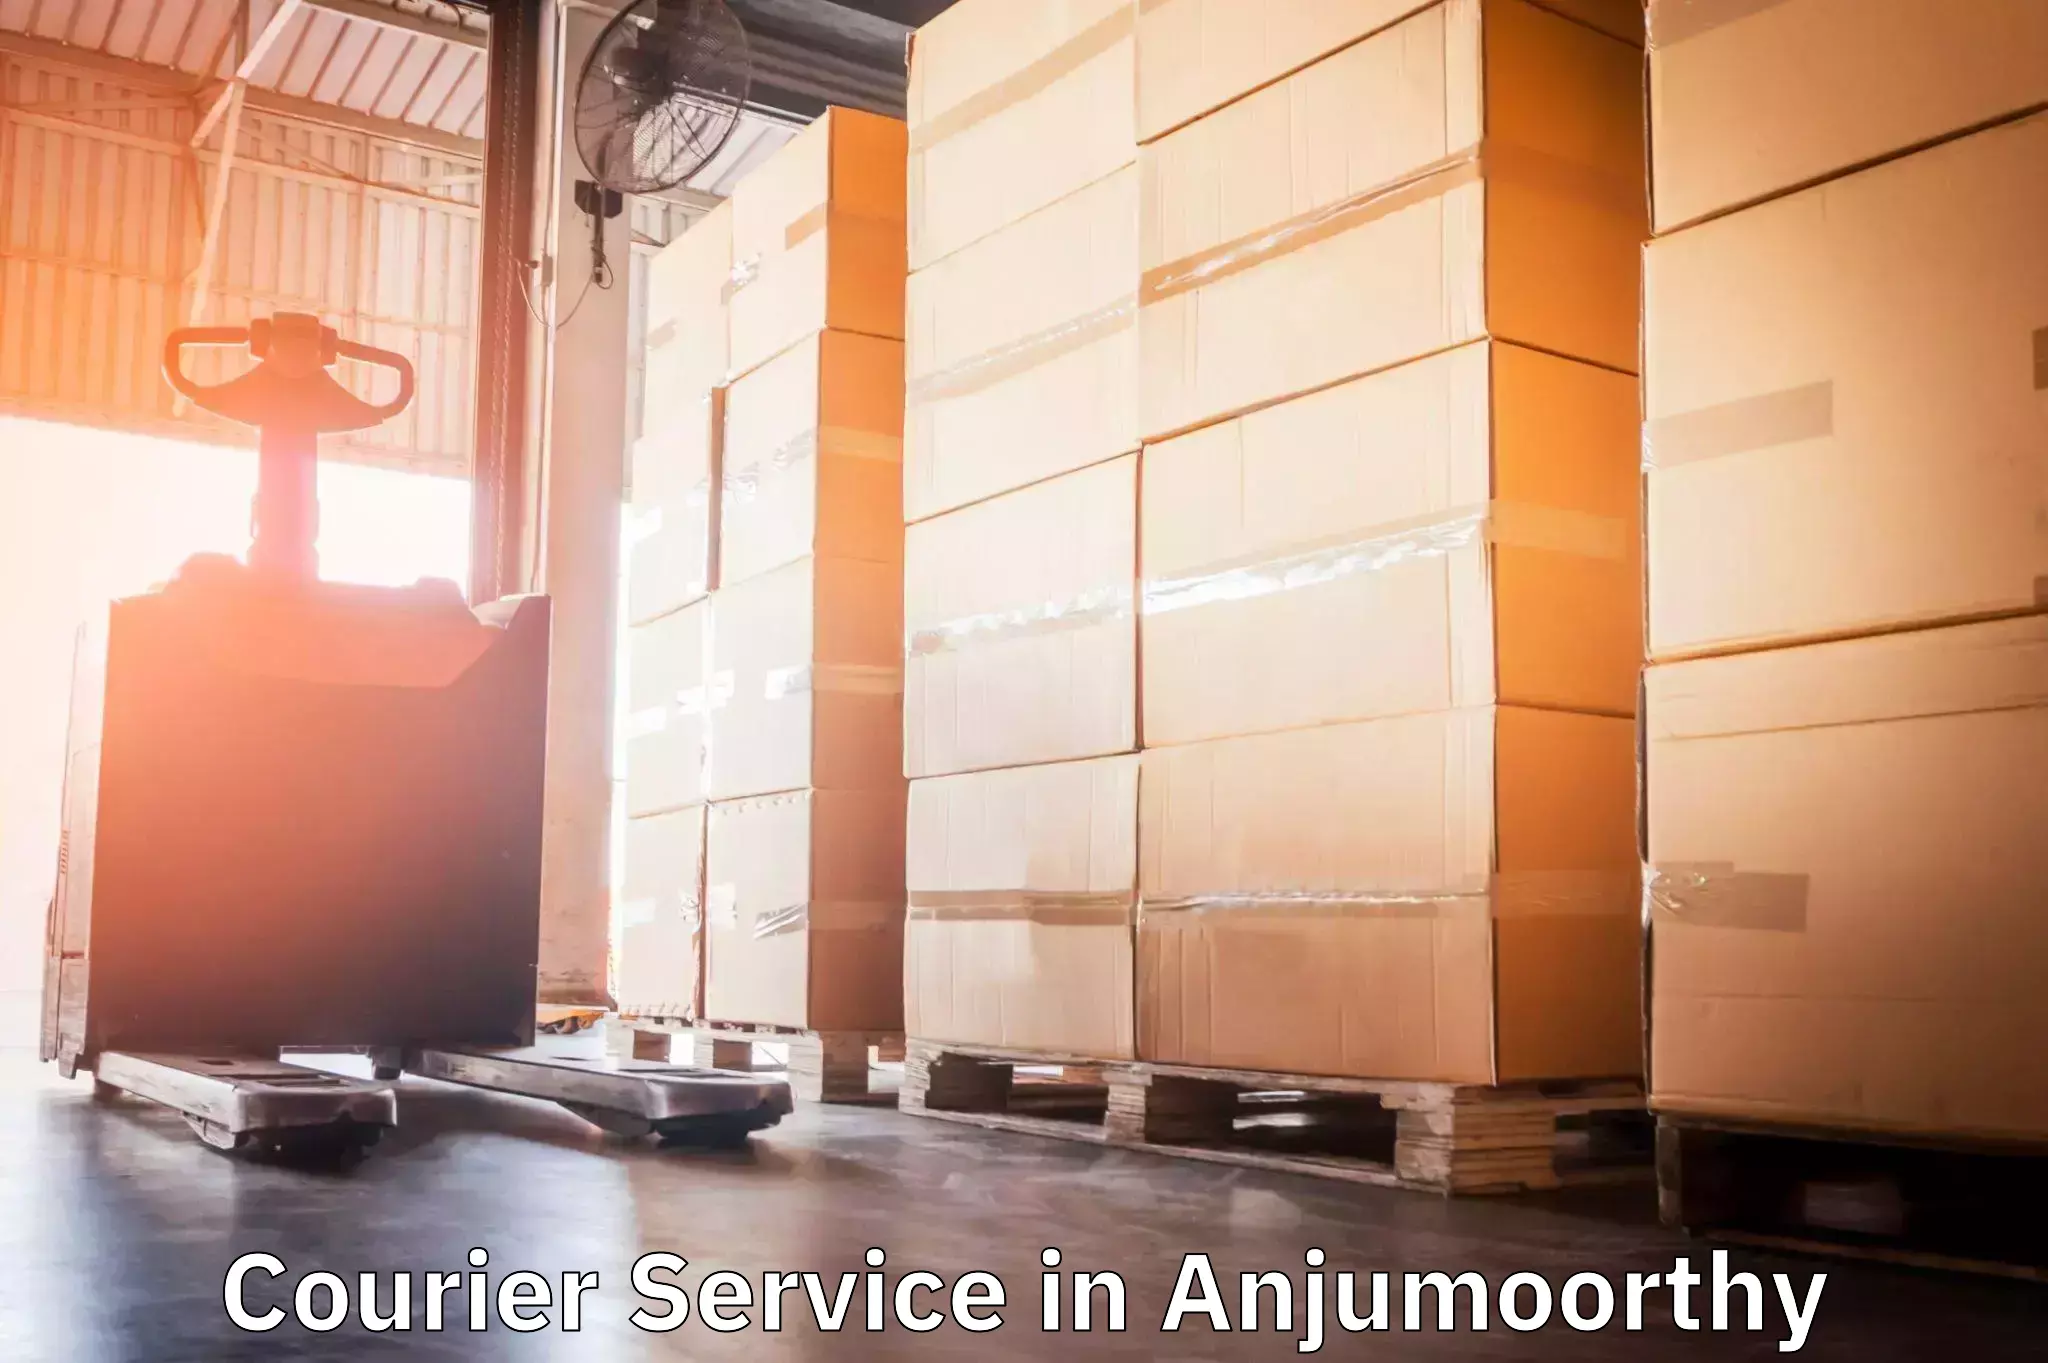 Express courier capabilities in Anjumoorthy